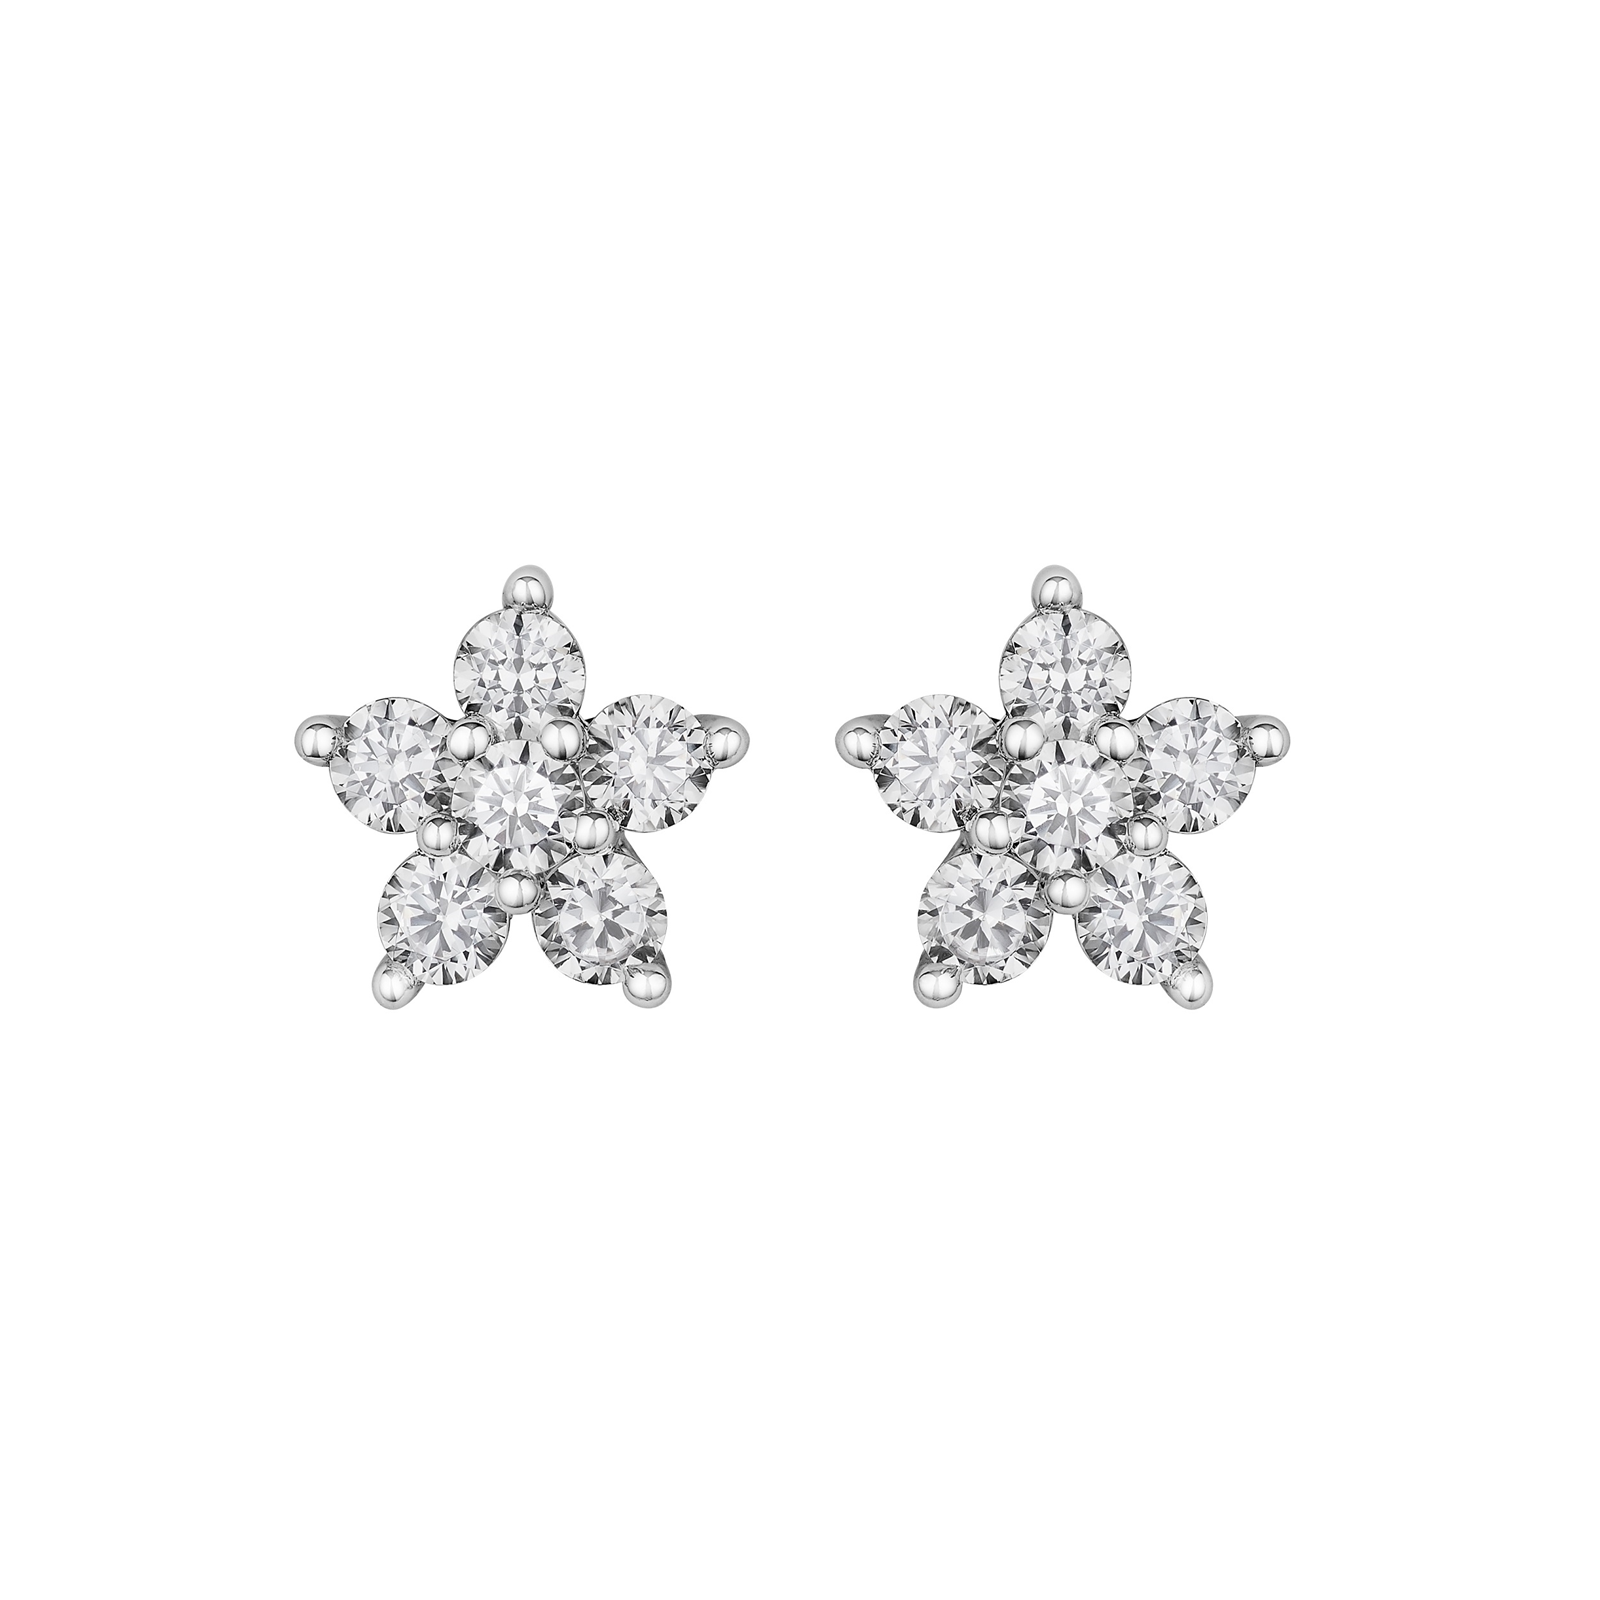 Silver Earrings By CS-DB Vintage Flowers Garland Clear Round Cubic Zirconia Stud Earrings For Womens 